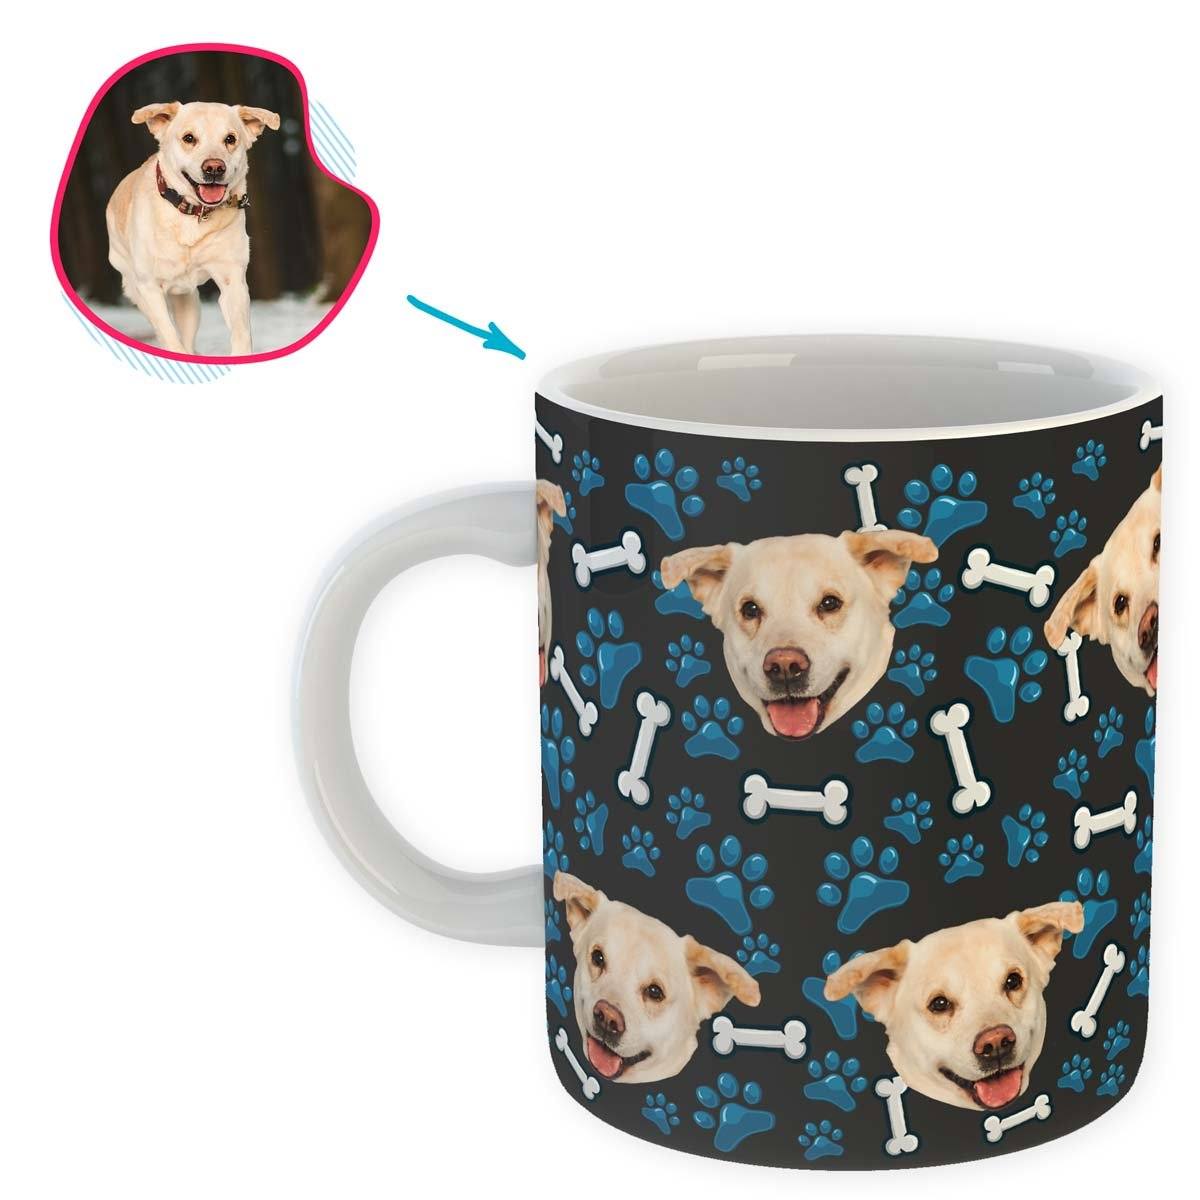 dark Dog mug personalized with photo of face printed on it